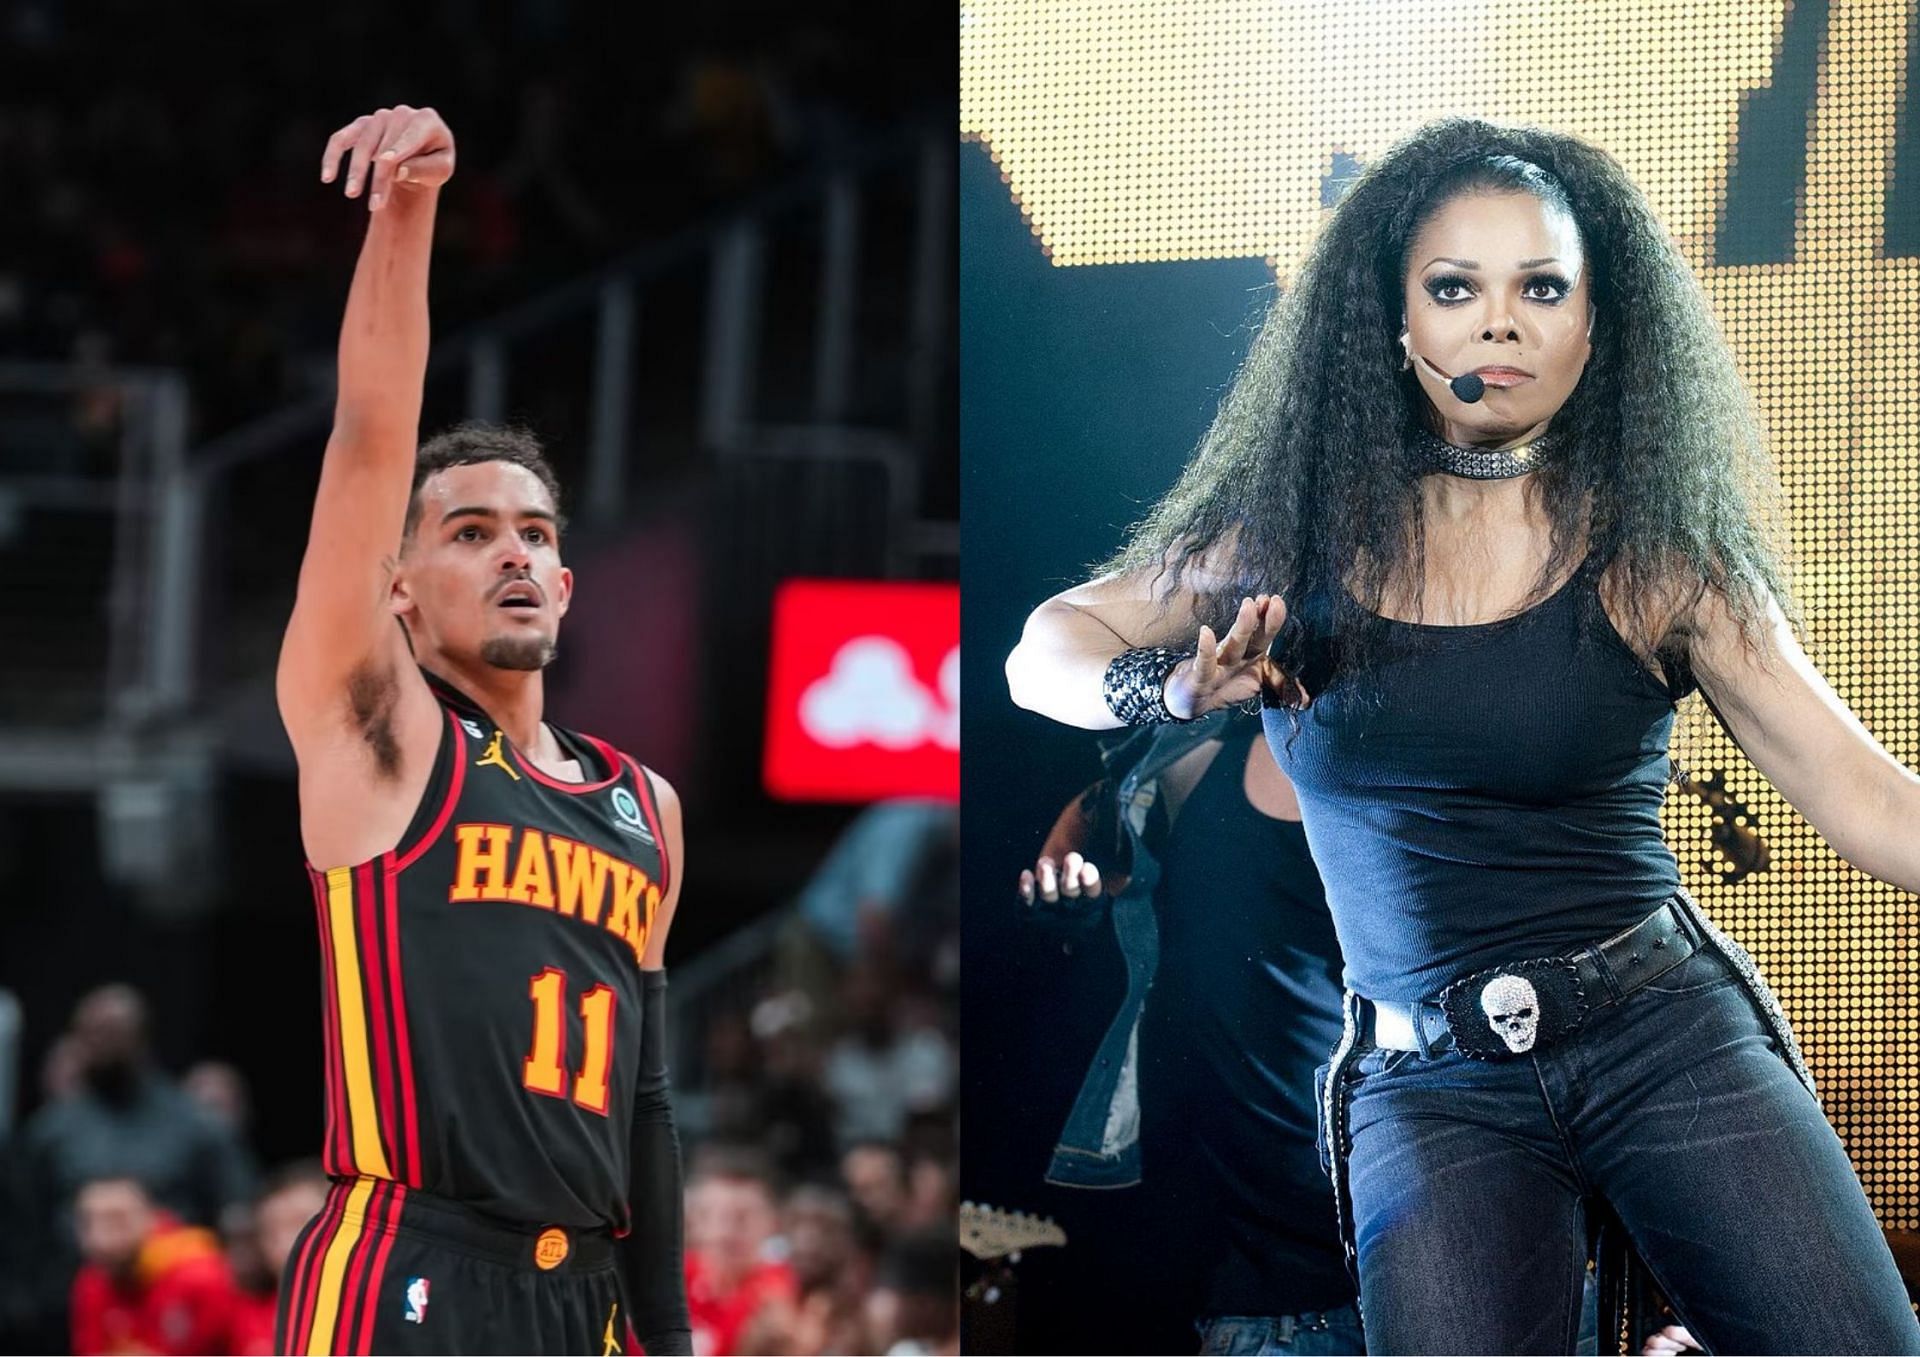 The Atlanta Hawks have booked a Janet Jackson concert on April 27, the same date as Game 6 of their series against the Boston Celtics.